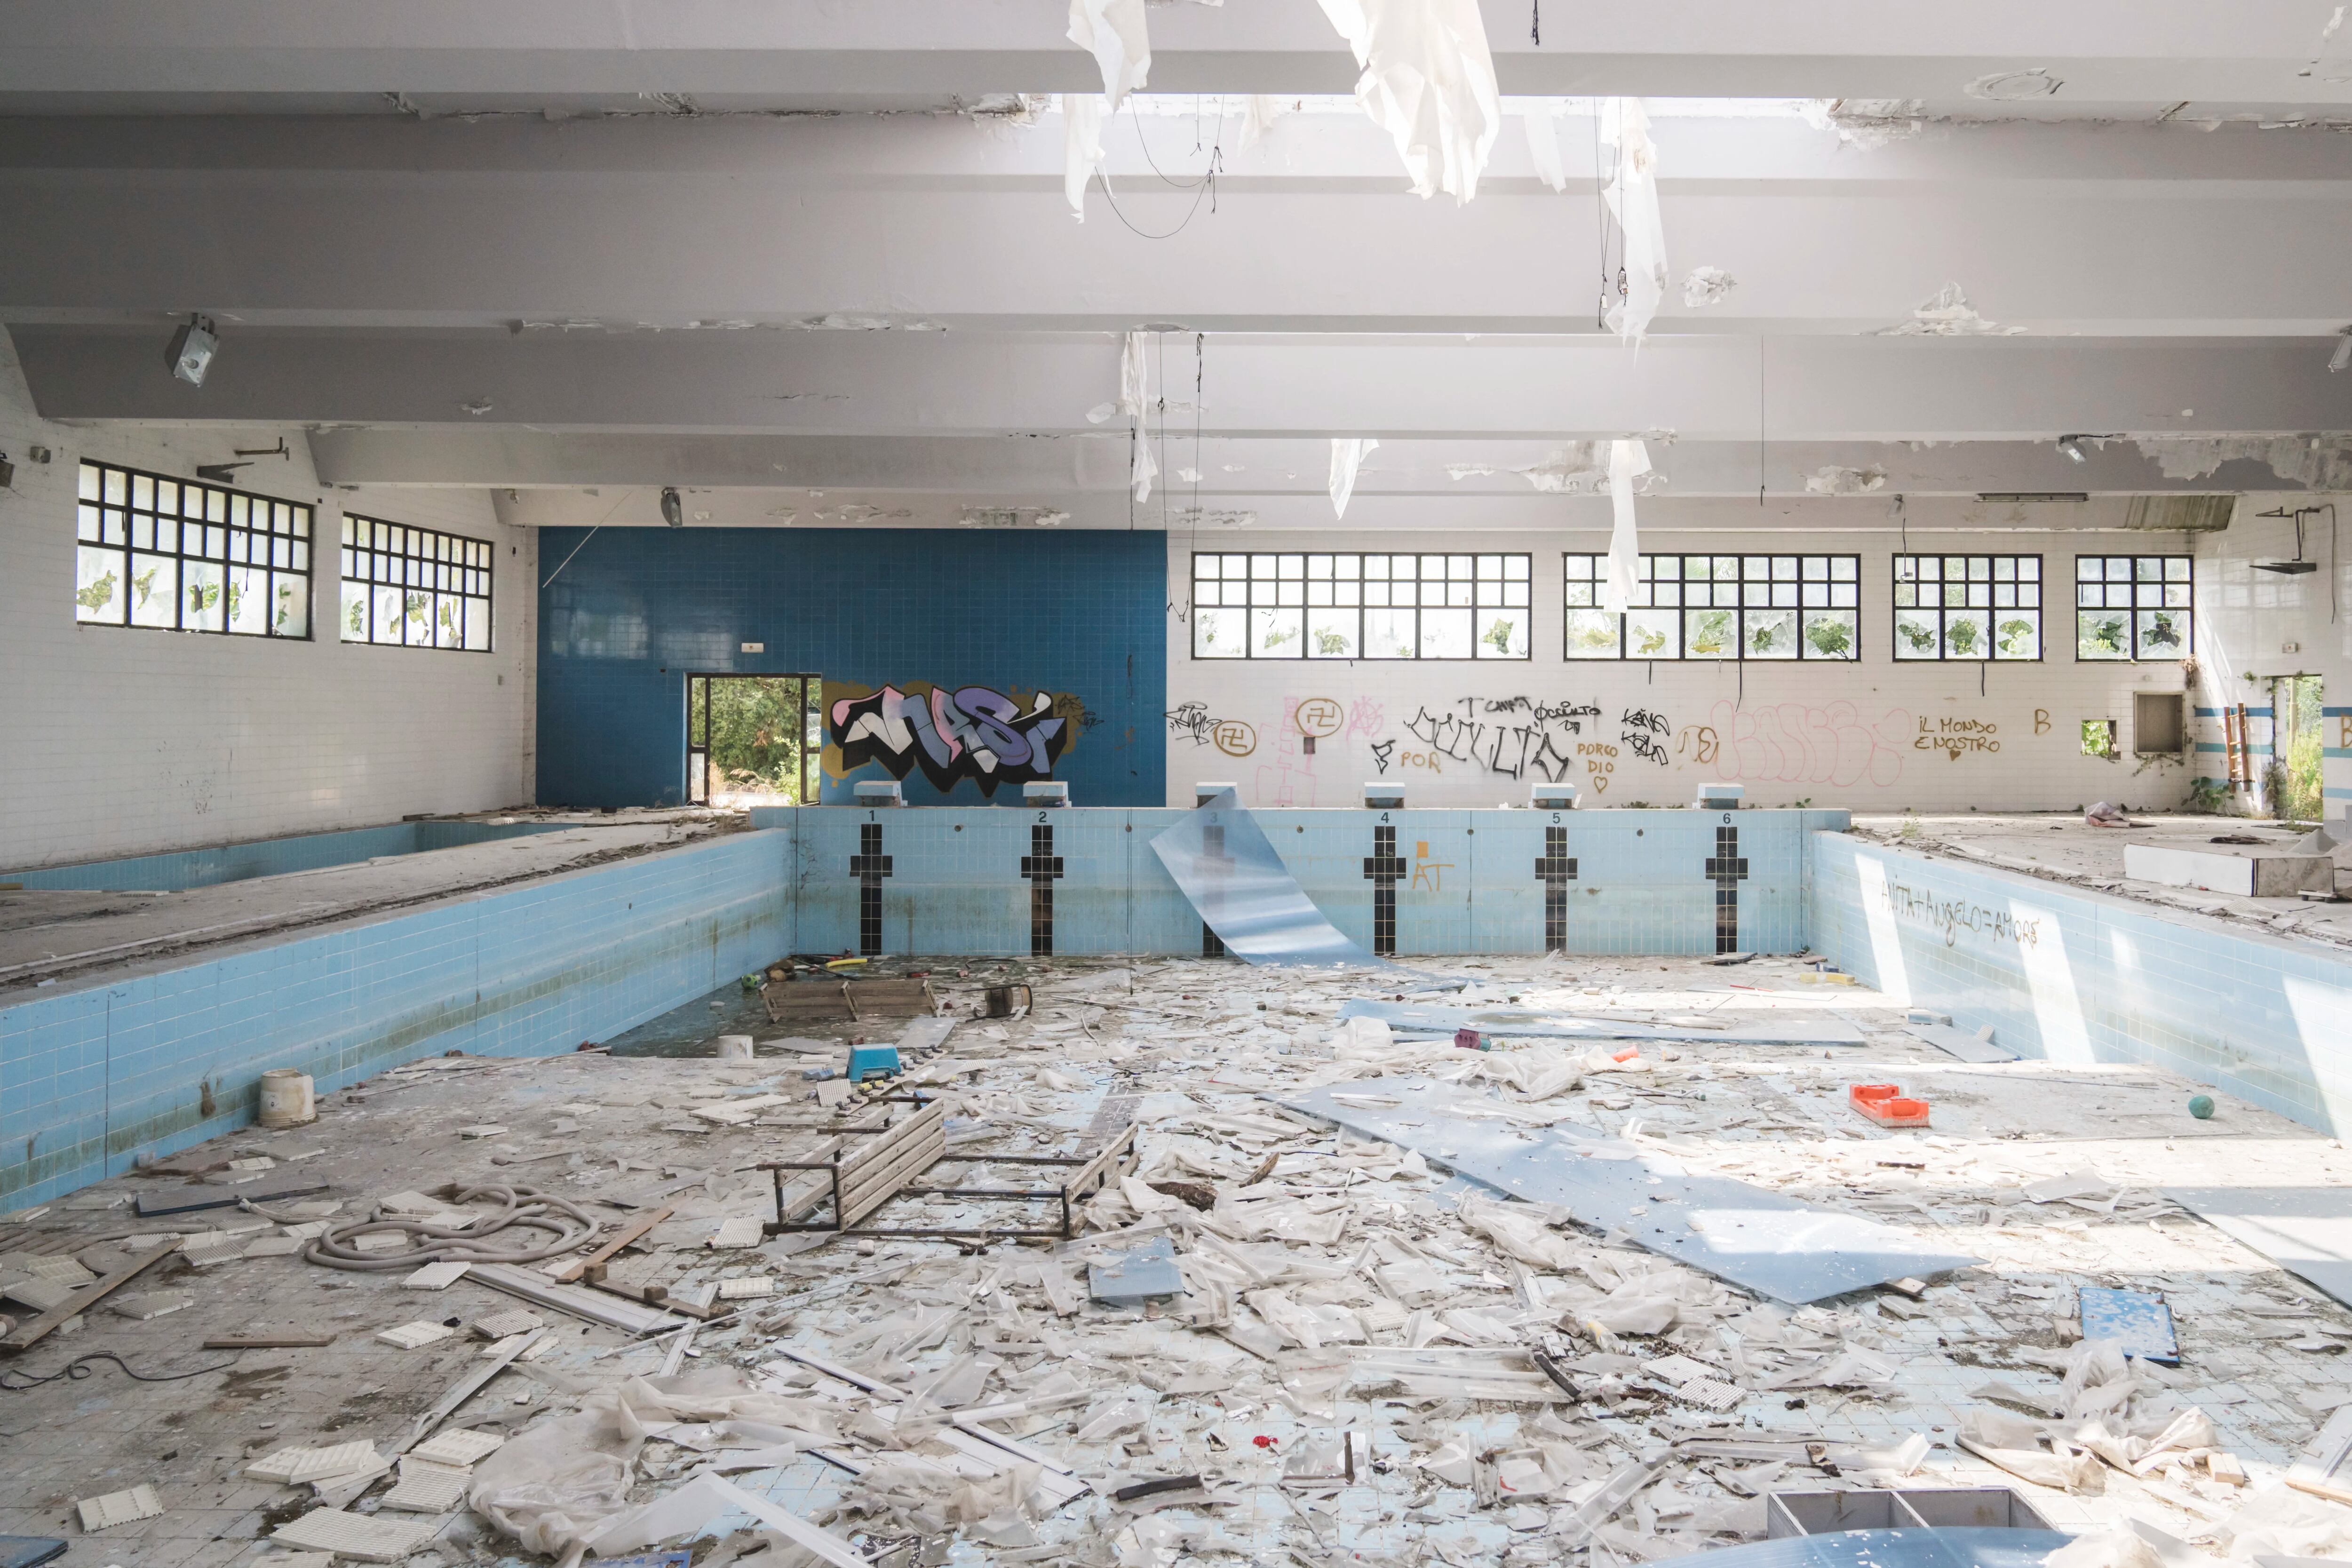 — EMBARGO: NO ELECTRONIC DISTRIBUTION, WEB POSTING OR STREET SALES BEFORE 3 A.M. ET ON SUNDAY, SEPT. 3, 2023. NO EXCEPTIONS FOR ANY REASONS —  An abandoned swimming pool where police say two young girls were repeatedly raped by a gang of their peers, on the outskirts of Naples in Caivano, Italy, Aug. 30, 2023. A summer of horrific crimes has increased scrutiny of attitudes about women in the country, and the amplifying role of social media. (Gianni Cipriano/The New York Times)